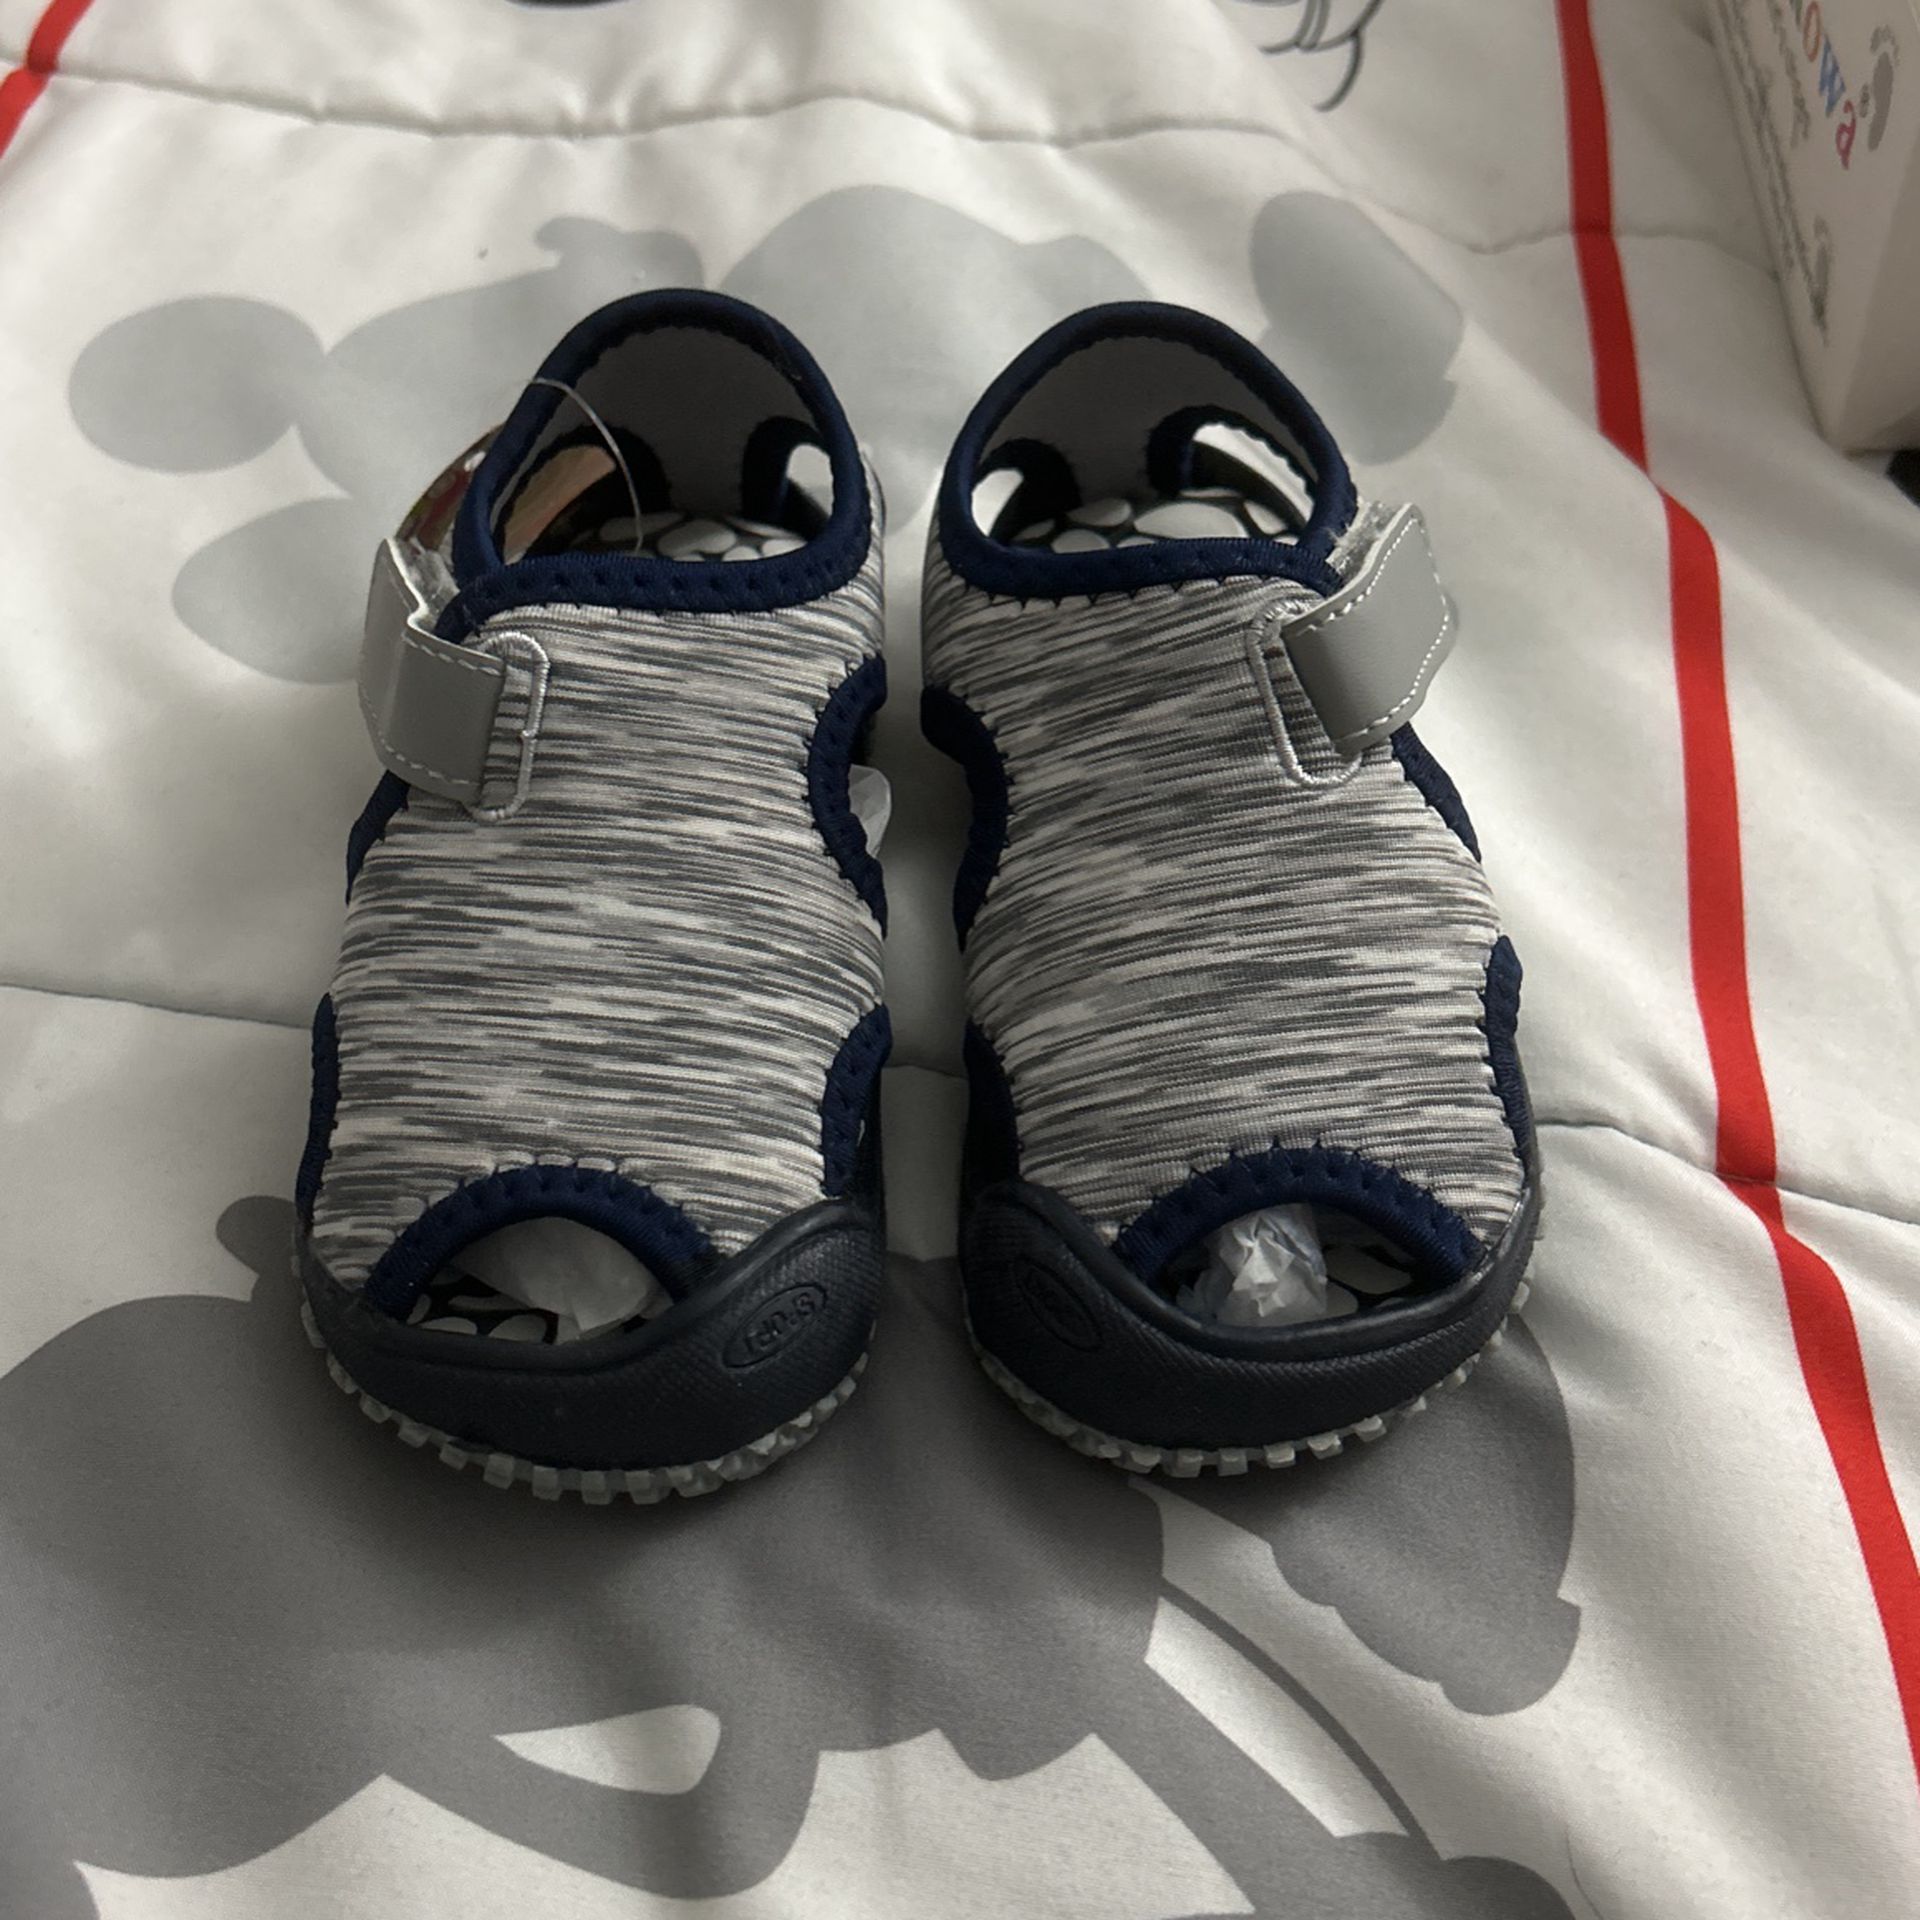 Toddler Sandals Size 8.5